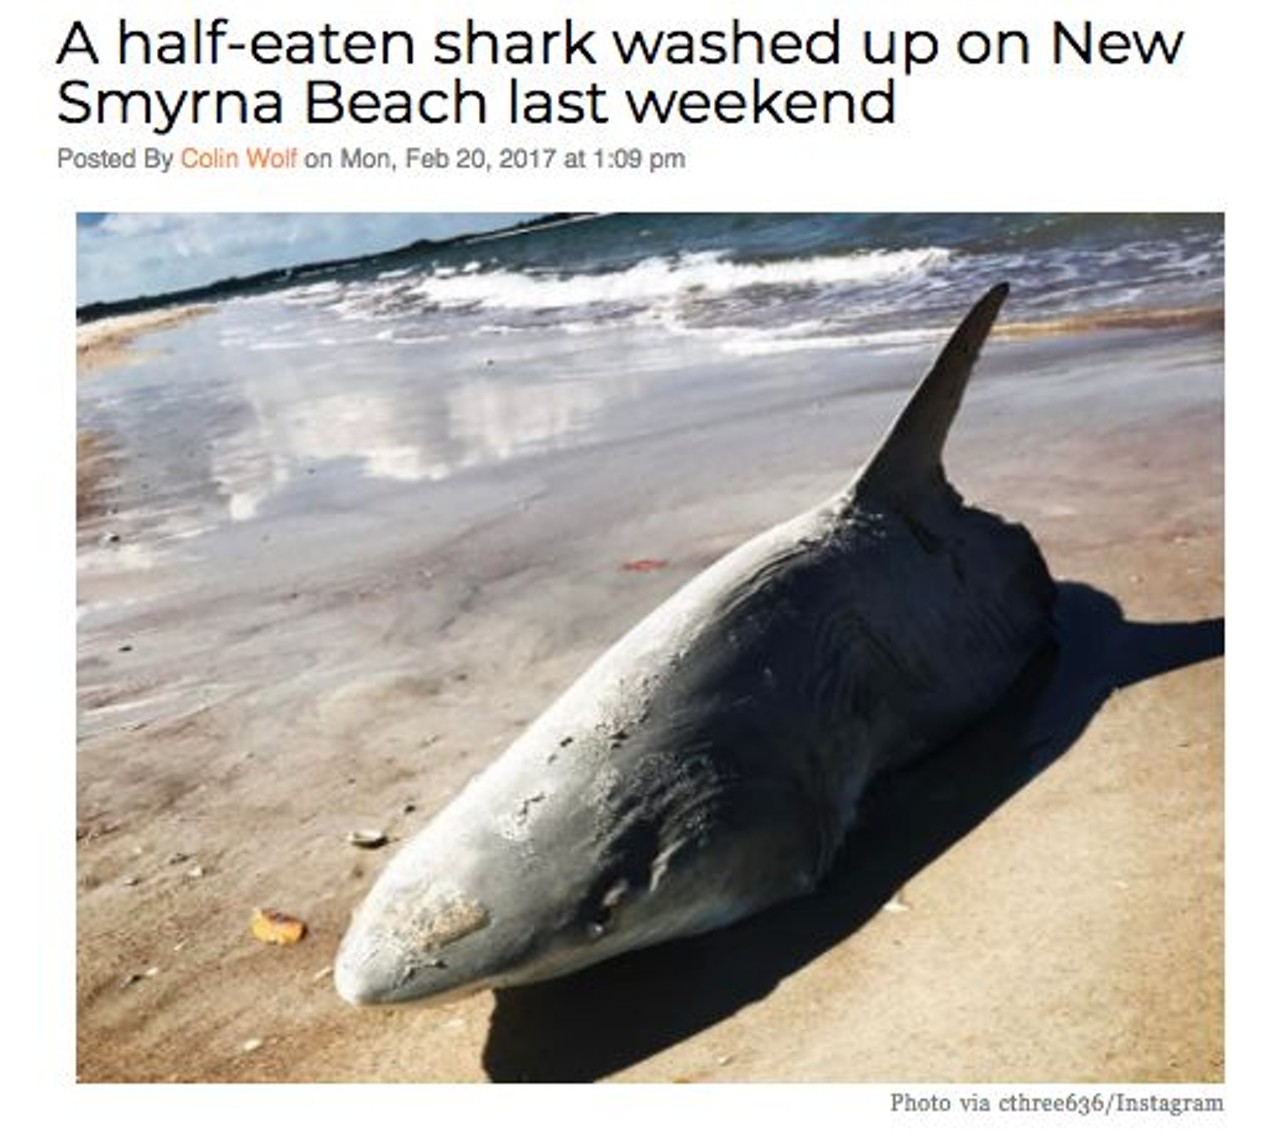 A big ol' half-eaten shark washed up ashore at New Smyrna Beach, a sobering reminder that not only is there always a bigger fish, but that the ocean is metal as hell. Read more